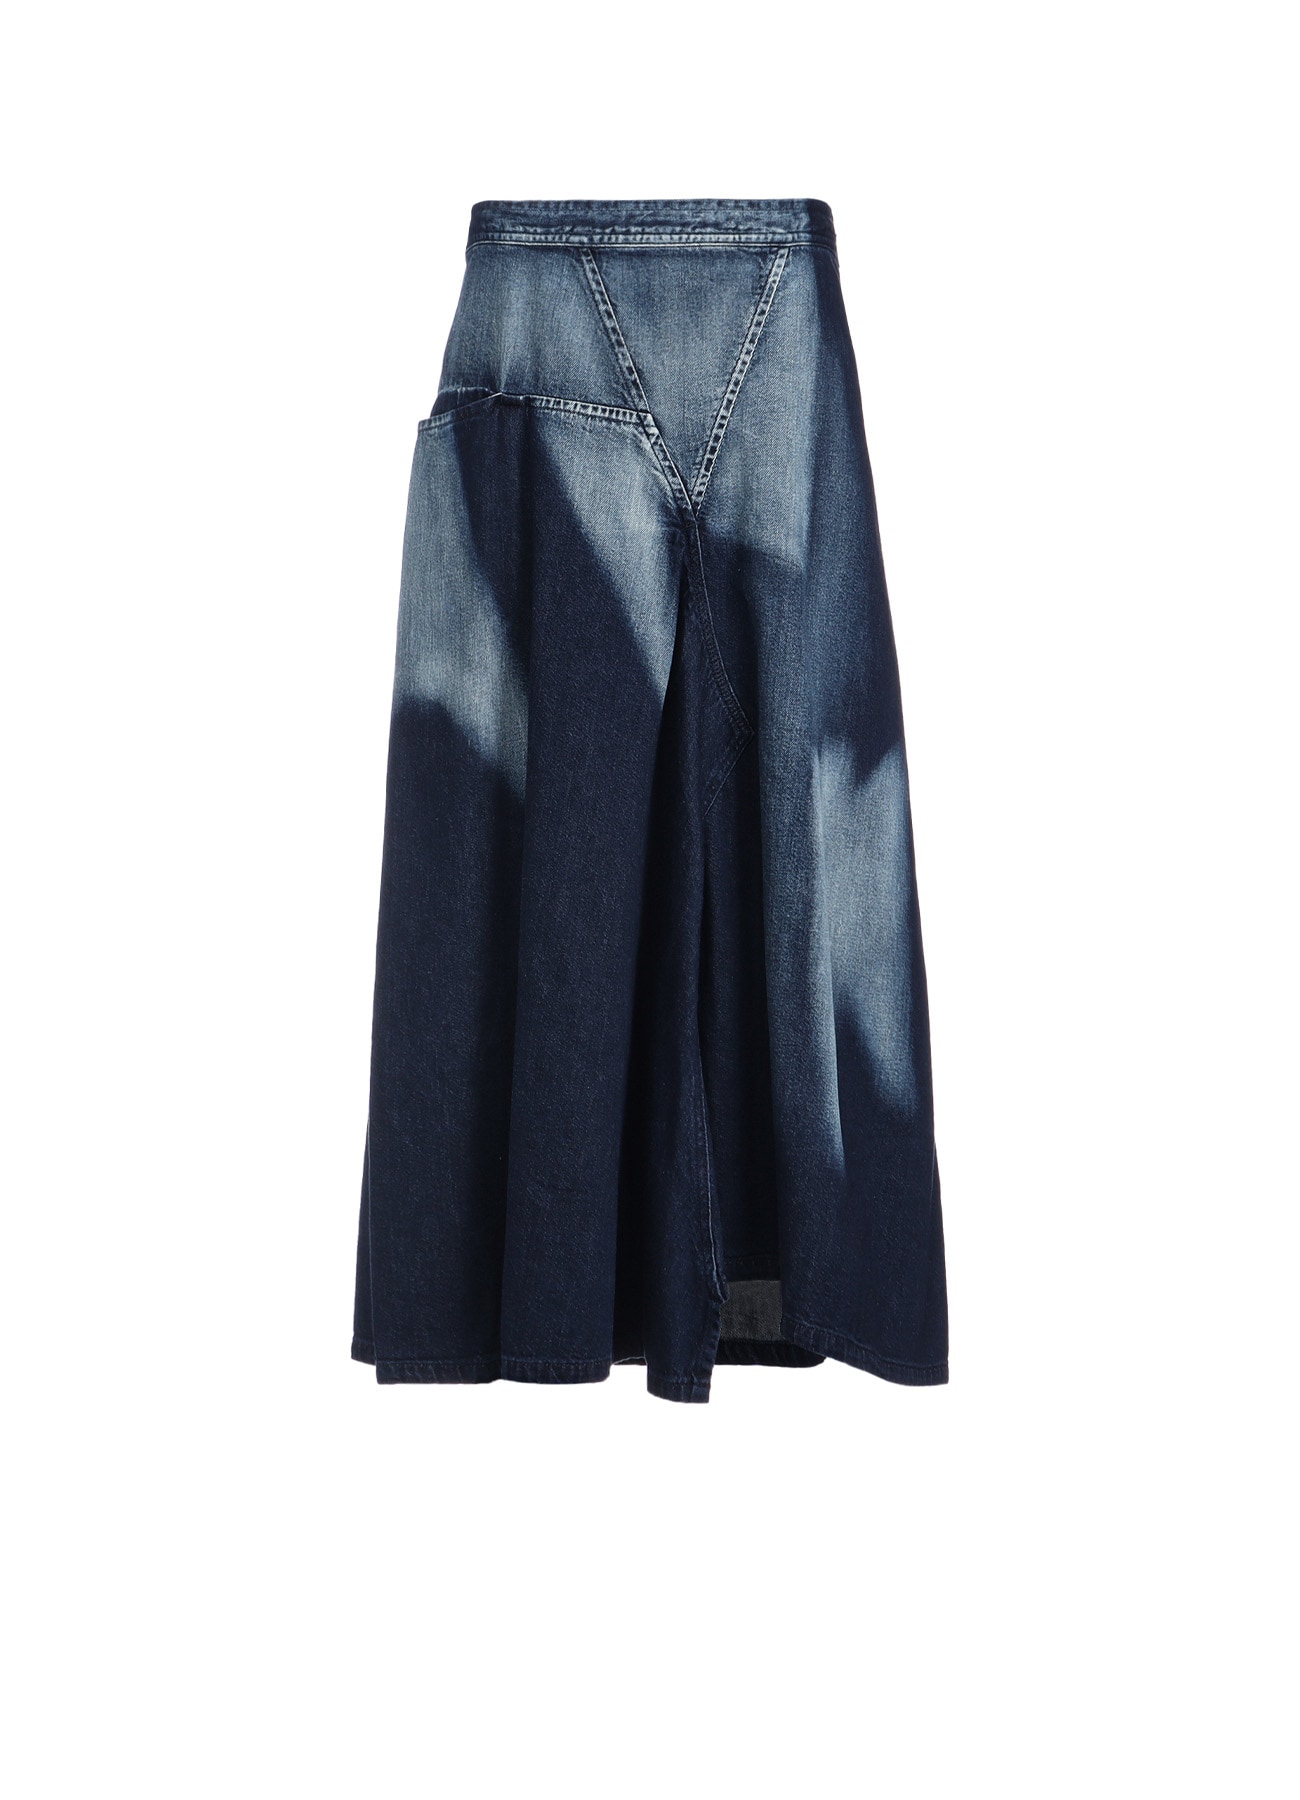 【8/2 12:00 Release】C/ SPOTTED DENIM TRIANGLE GUSSET FLARE SKIRT